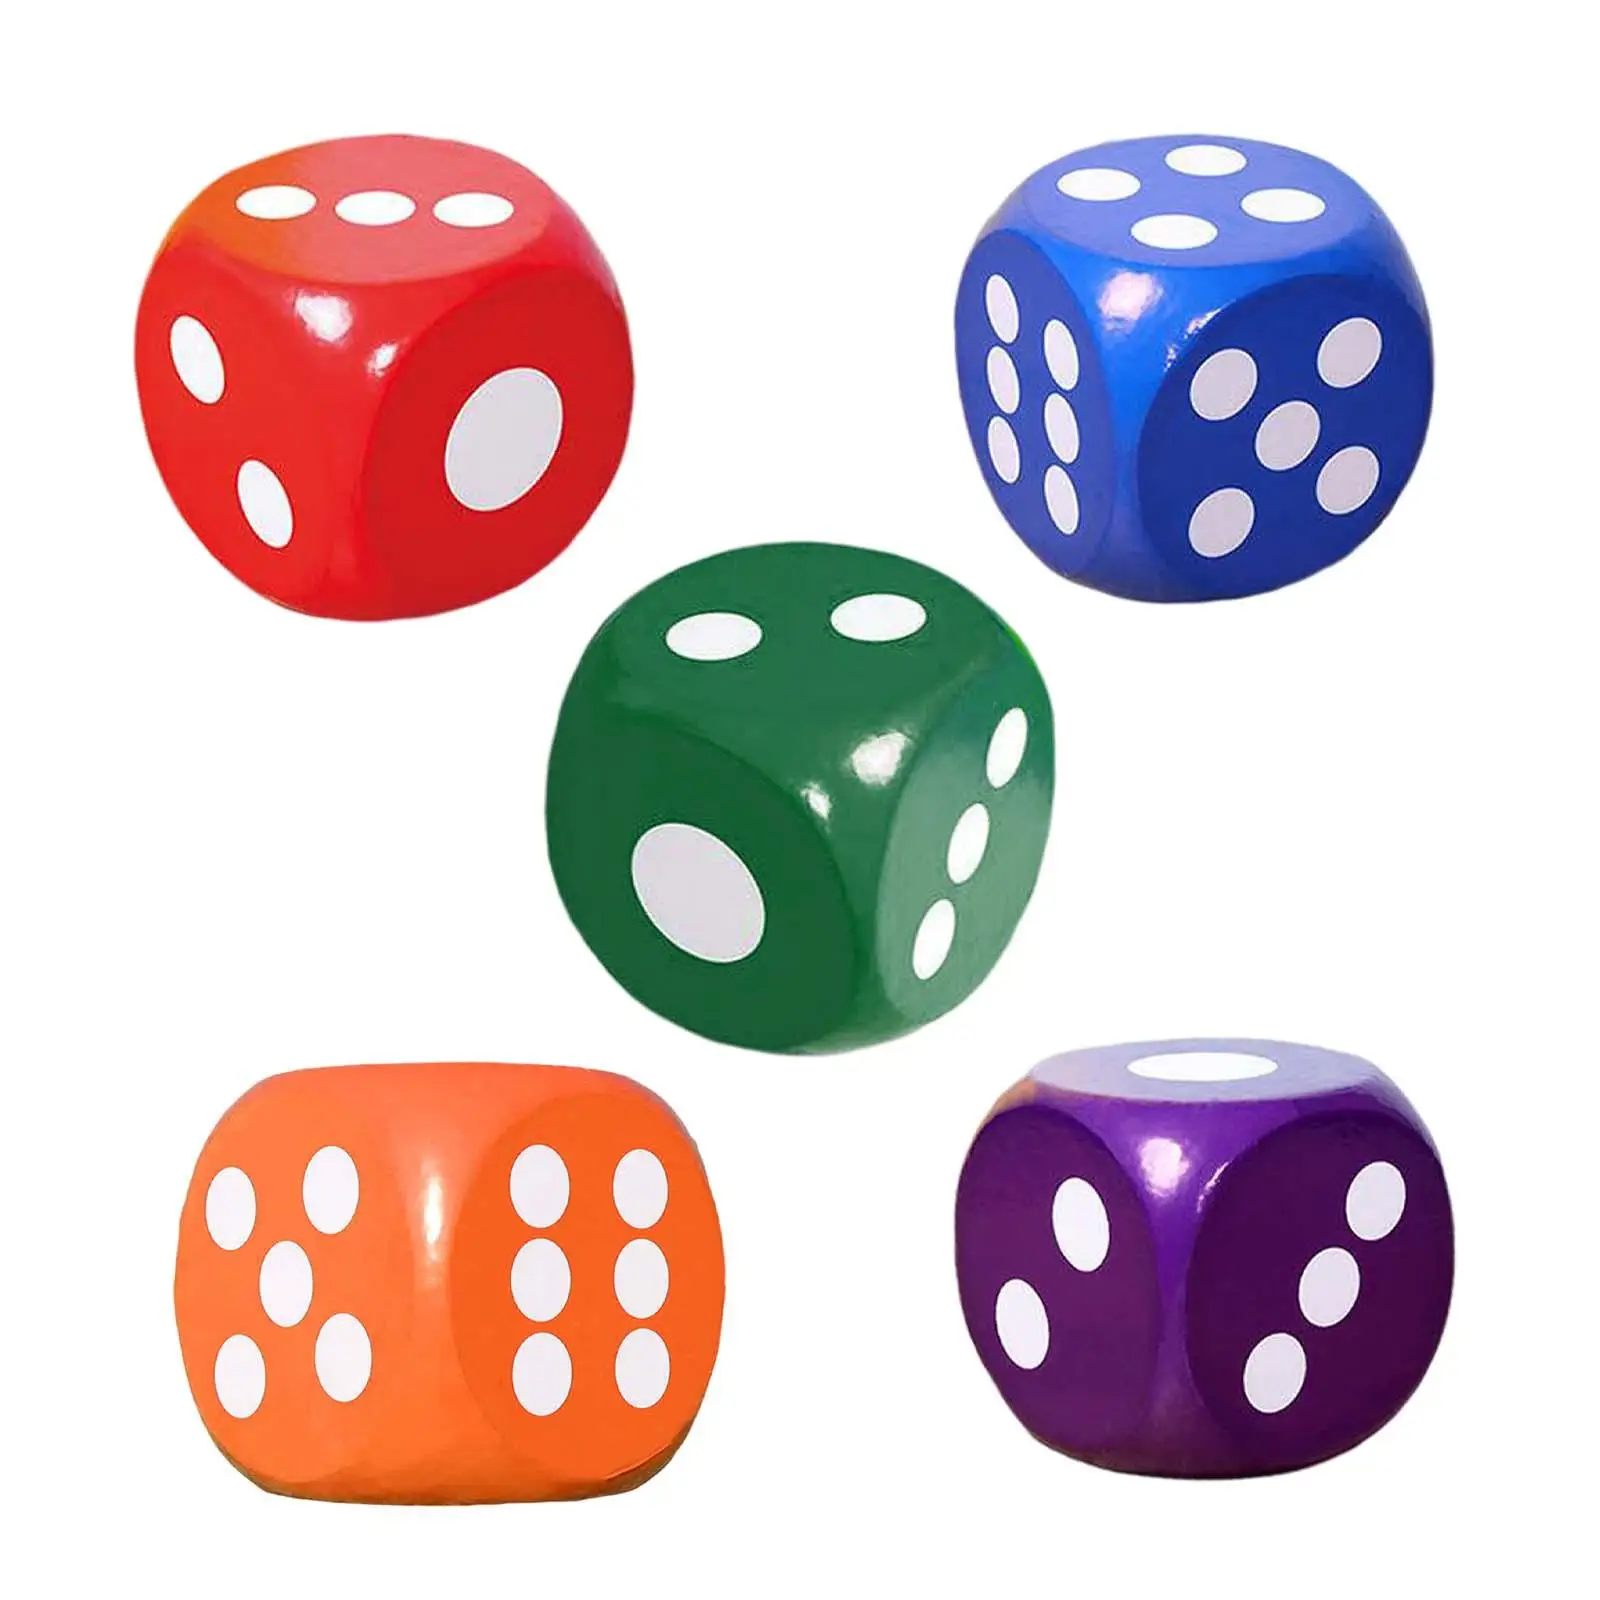 20cm Foam Dice Learn Math Counting Educational Toys Develop Intelligence Stem Learning Playing Dice for Teacher Students Kids